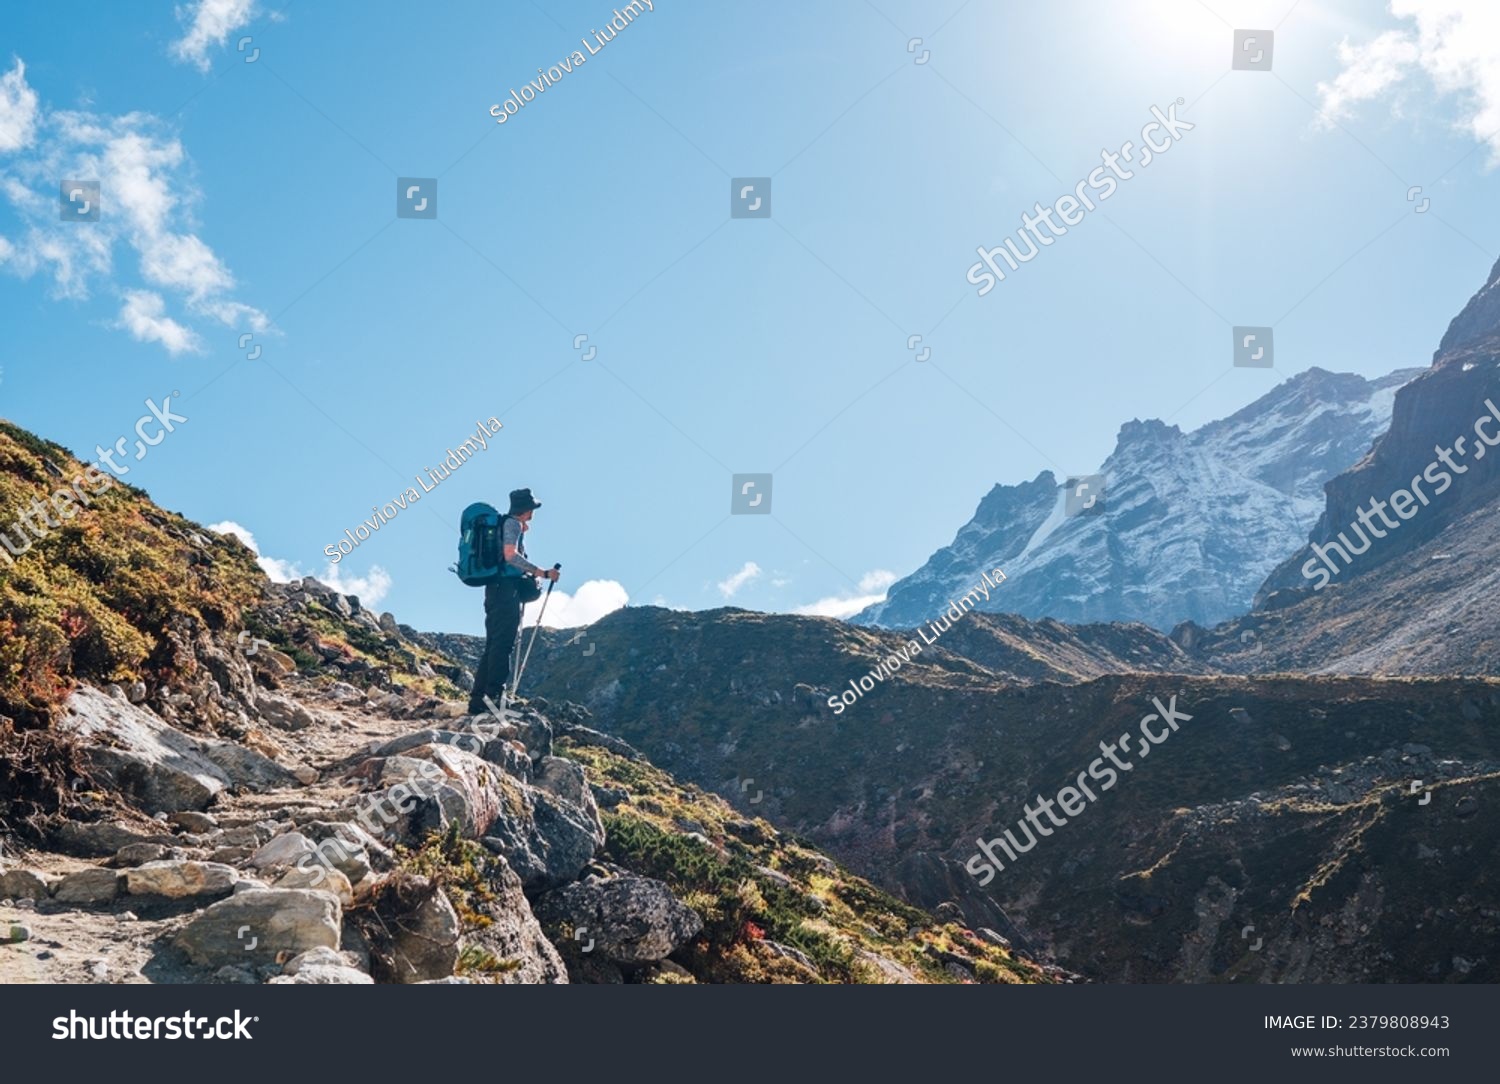 Young hiker backpacker man enjoying valley view in Makalu Barun Park route near Khare during high altitude acclimatization walk. Mera peak trekking route, Nepal. Active vacation concept image #2379808943